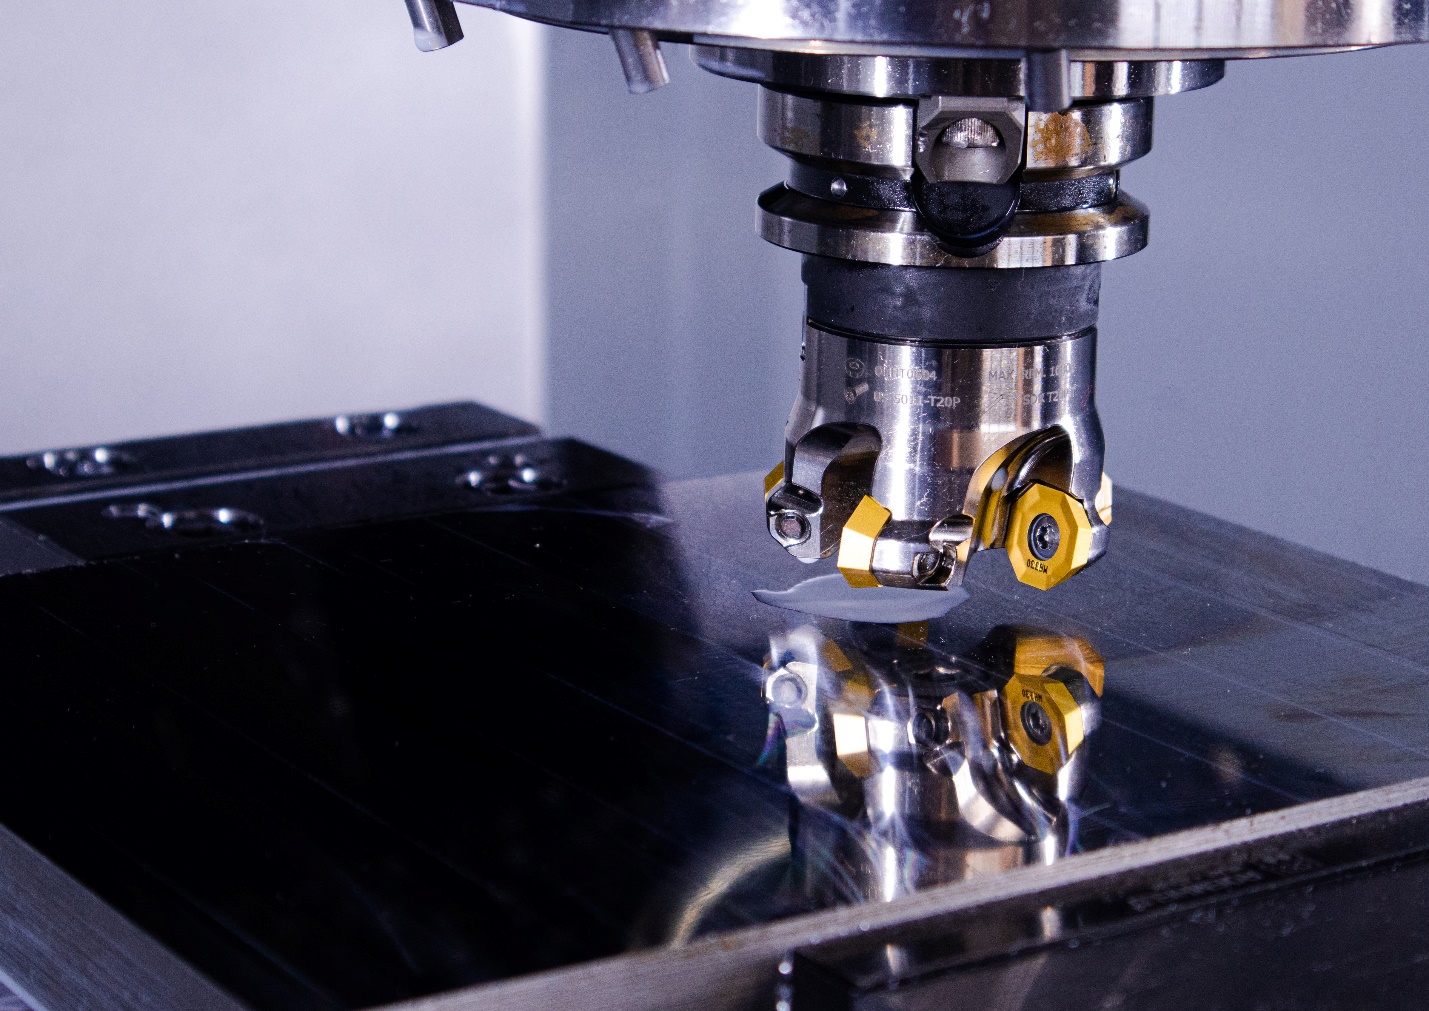 Primary Production Stages of CNC Milling- A Complete Guide